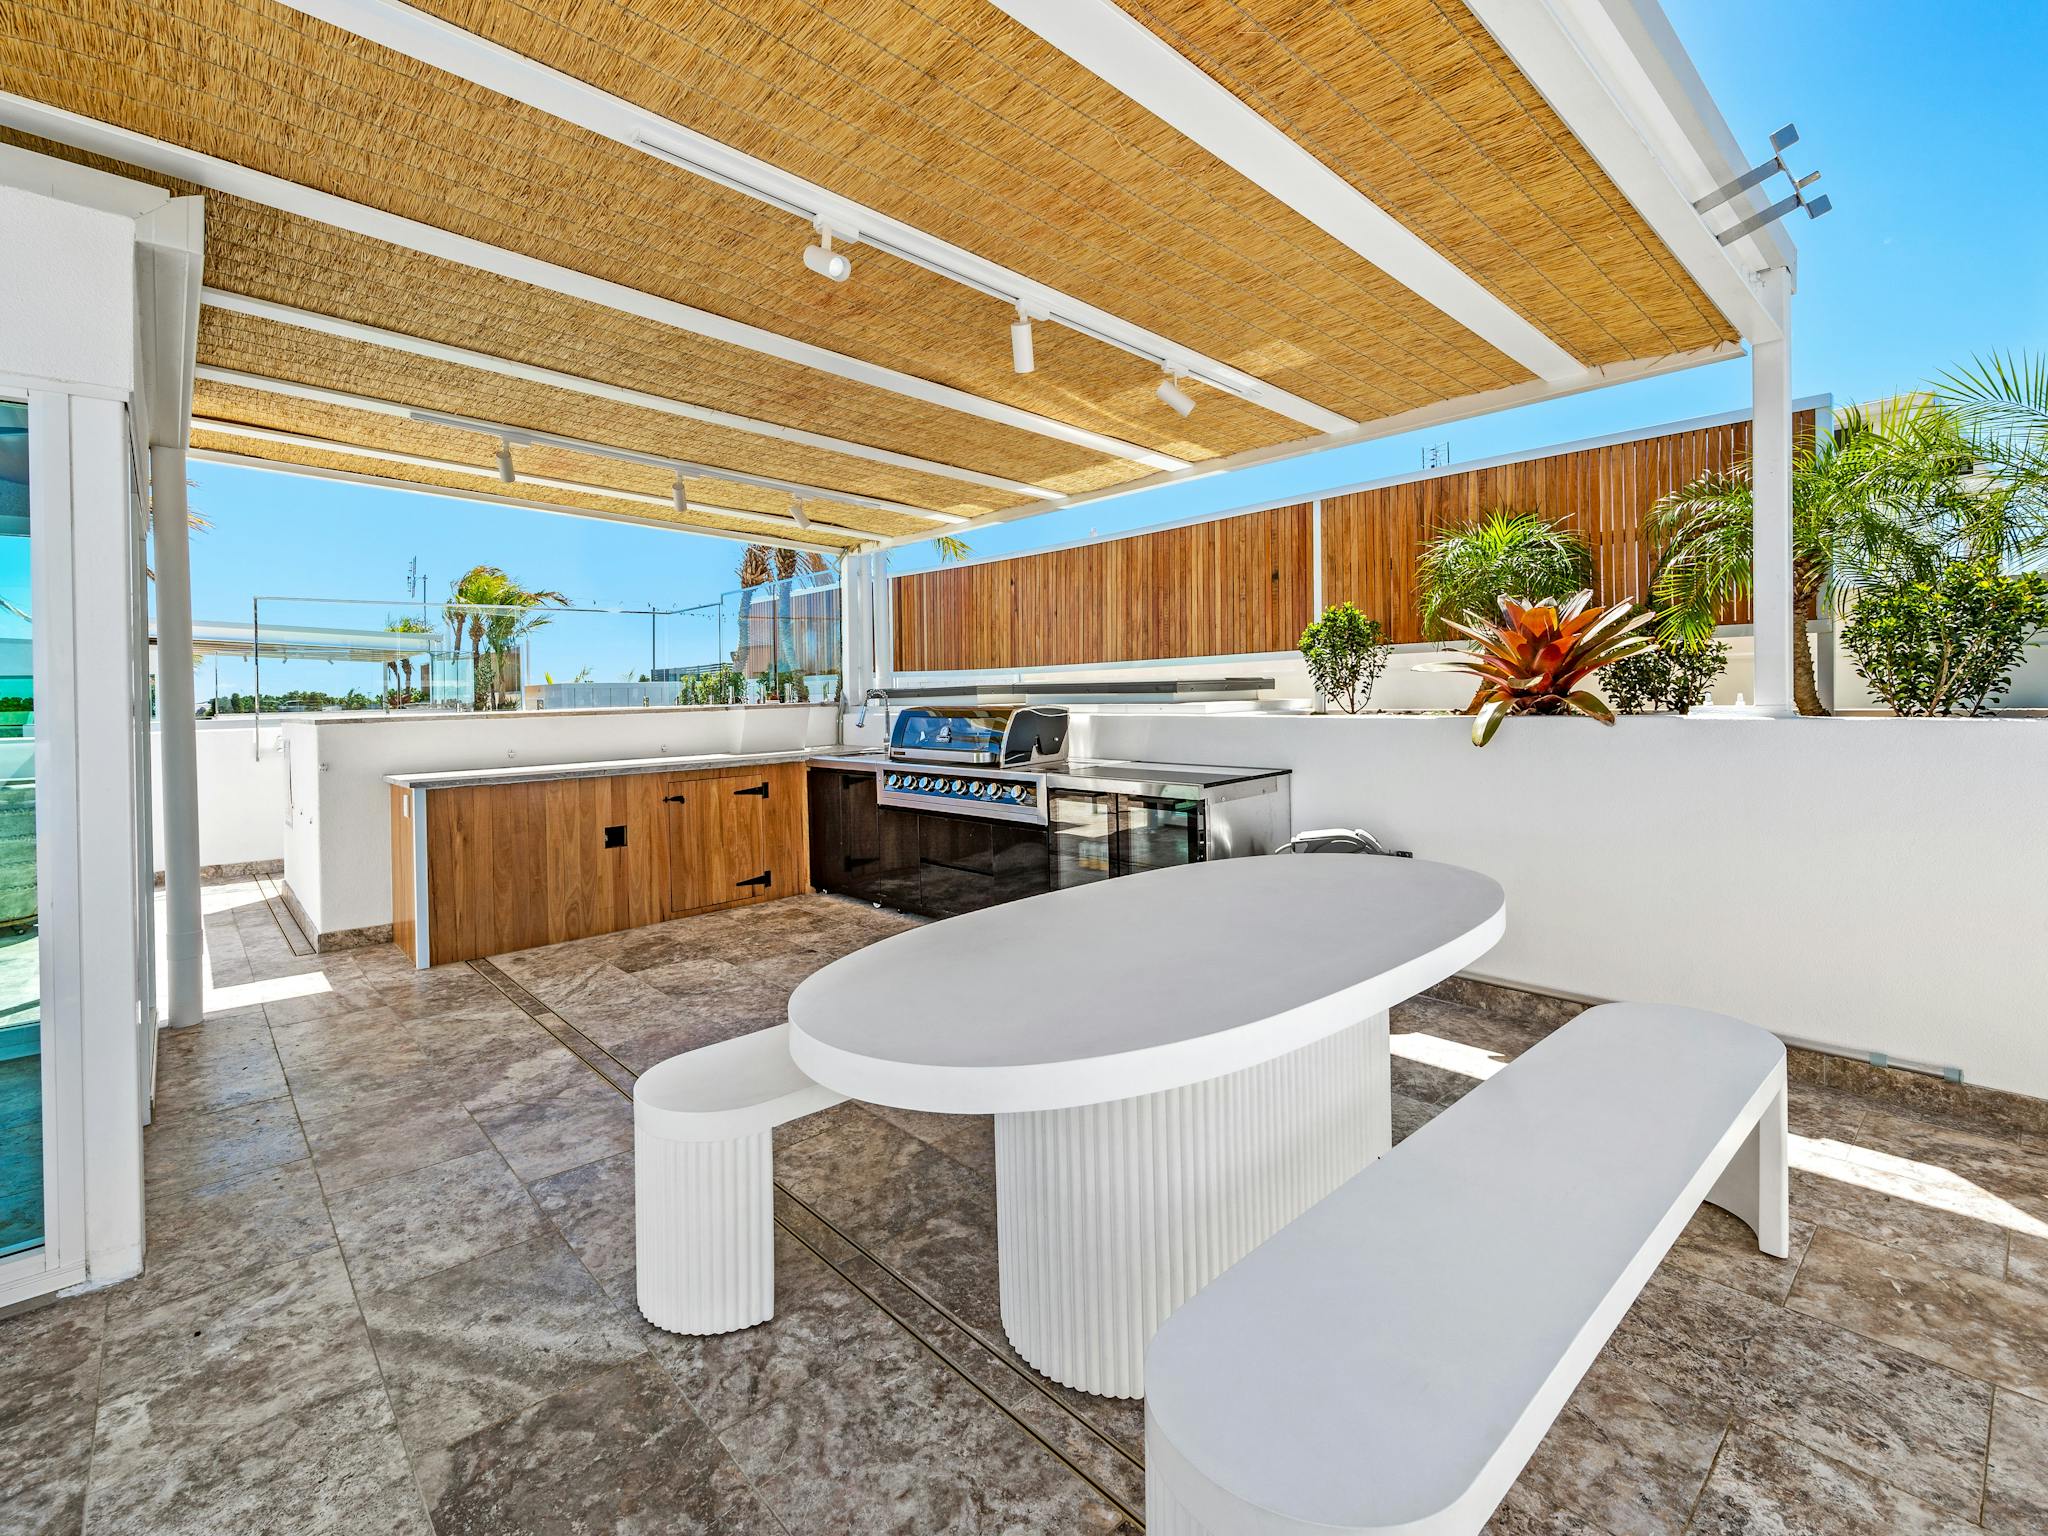 A barbeque, fridge, dining setting and plunge pool create a fabulous outdoor entertaining area